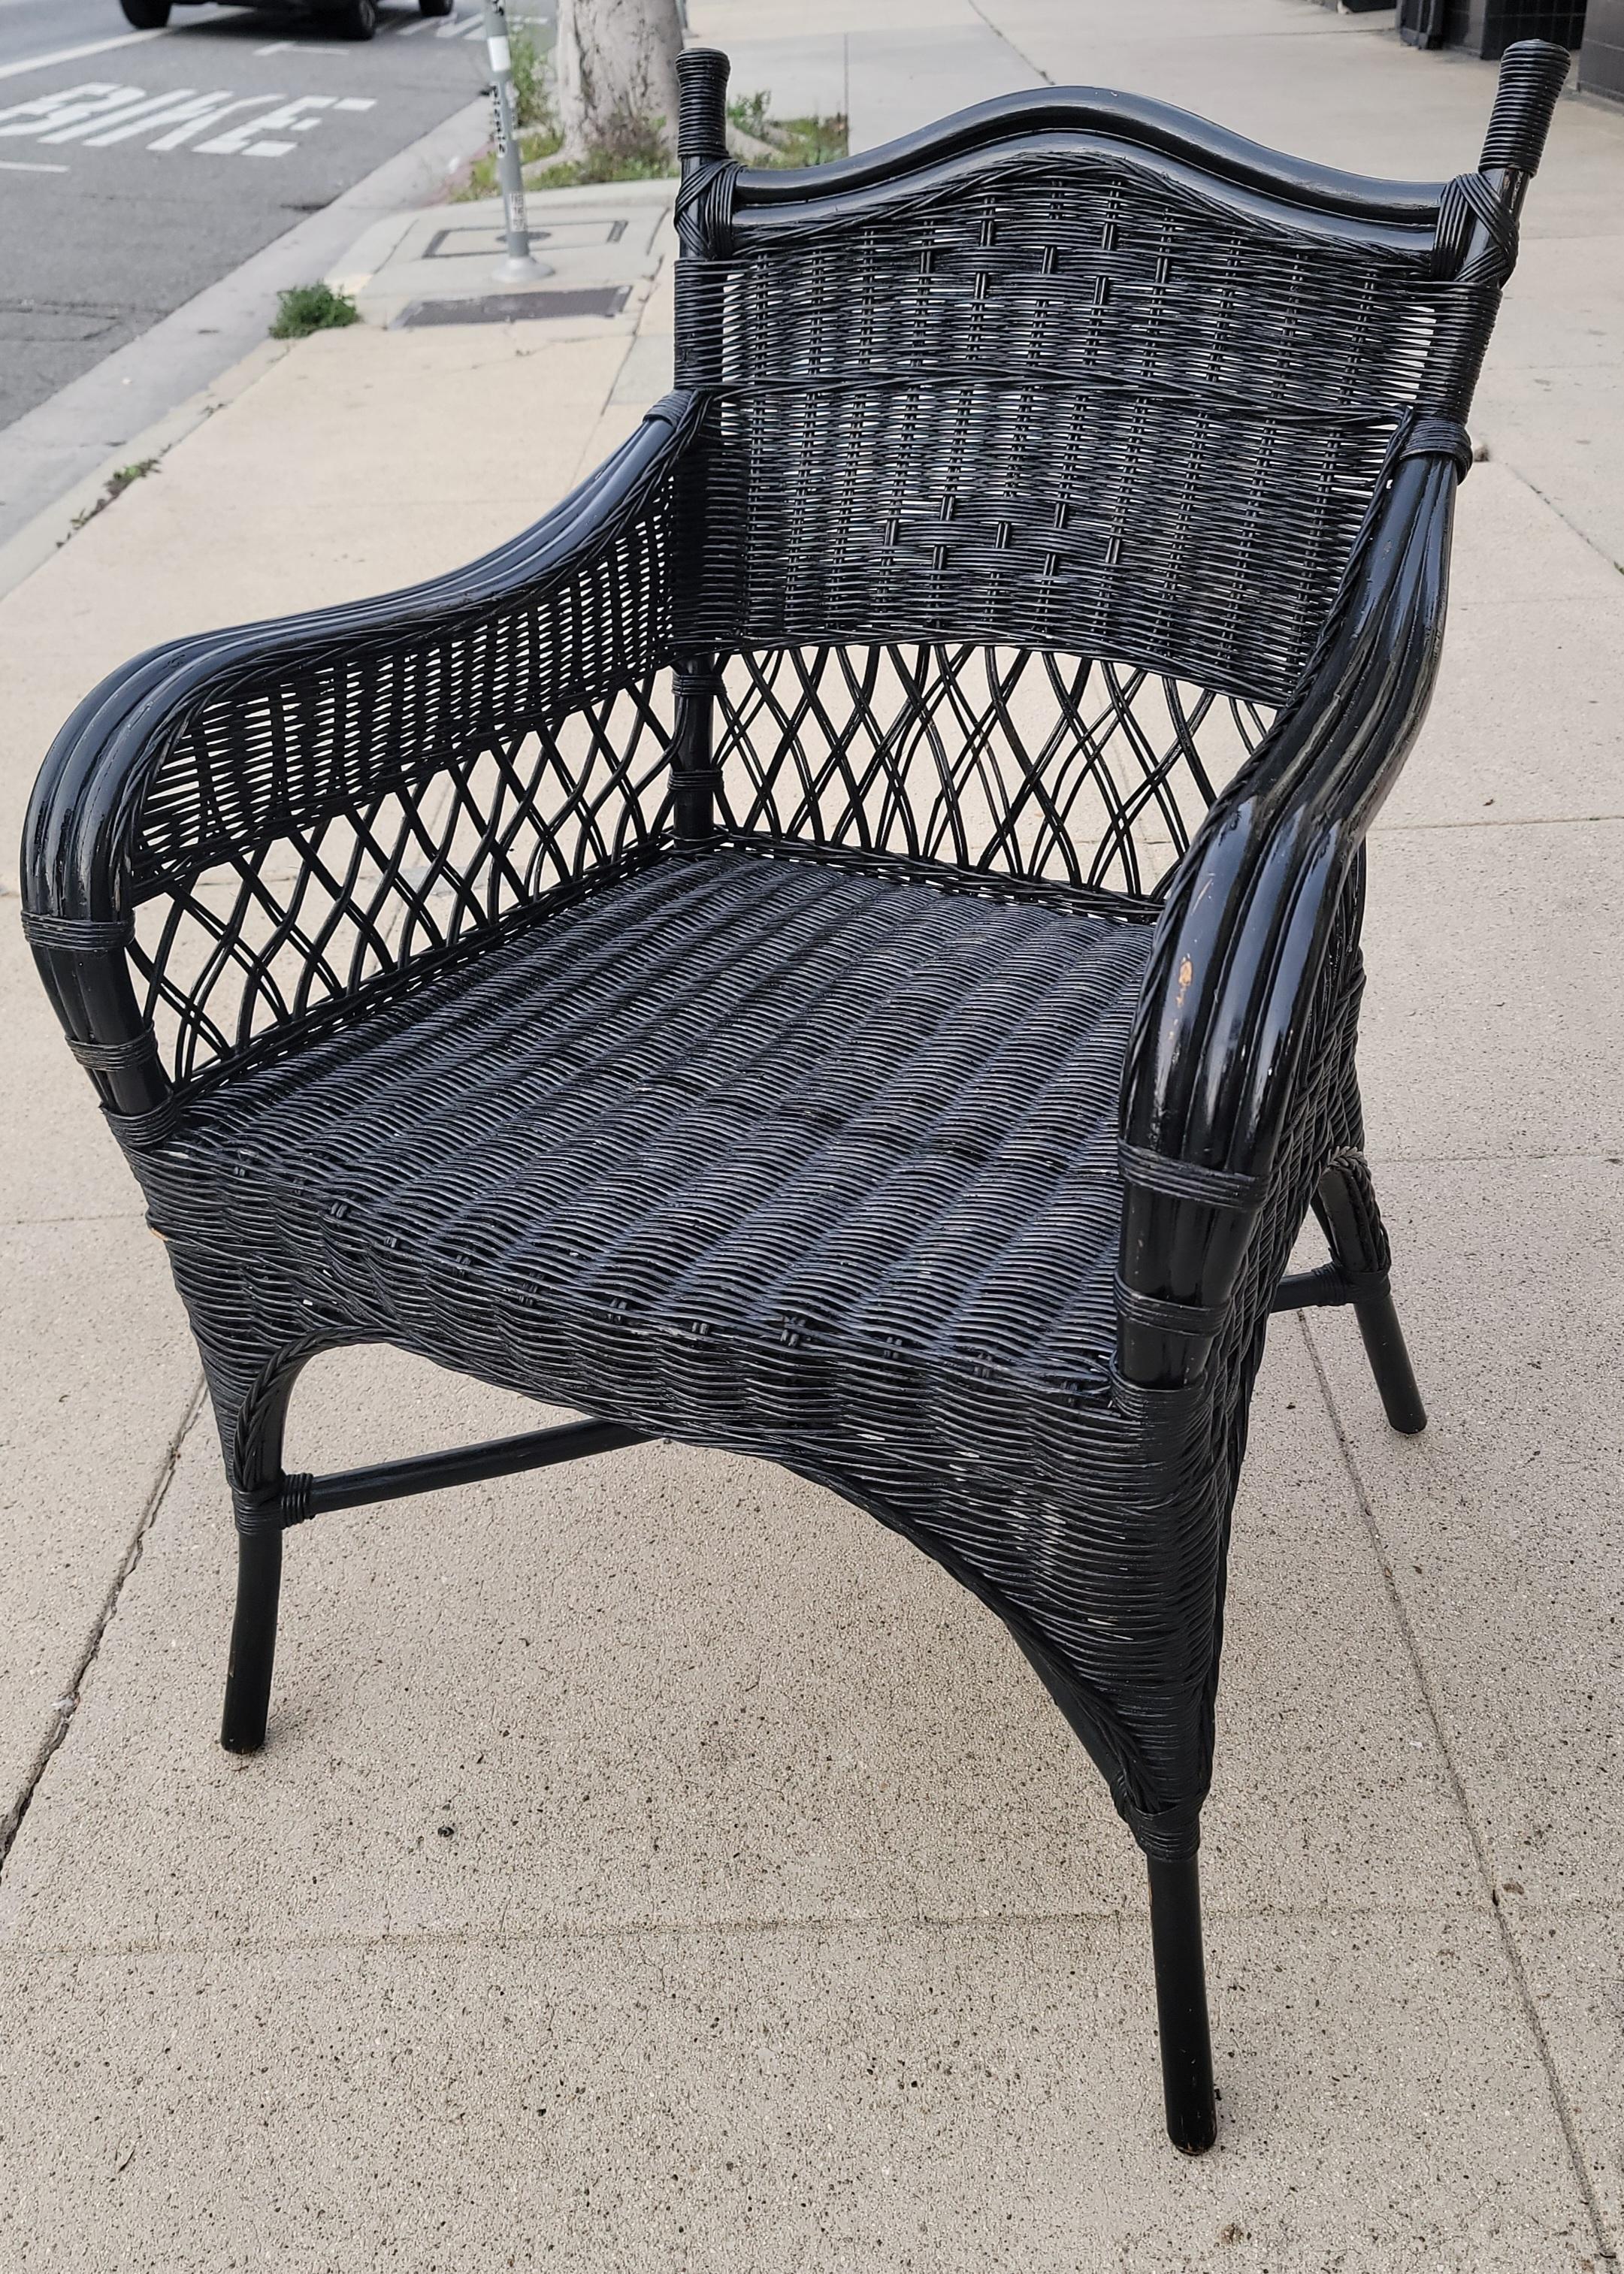 20th Century Bar Harbor Style Wicker Chairs With Sunbrella Fabric Cushions -Pair For Sale